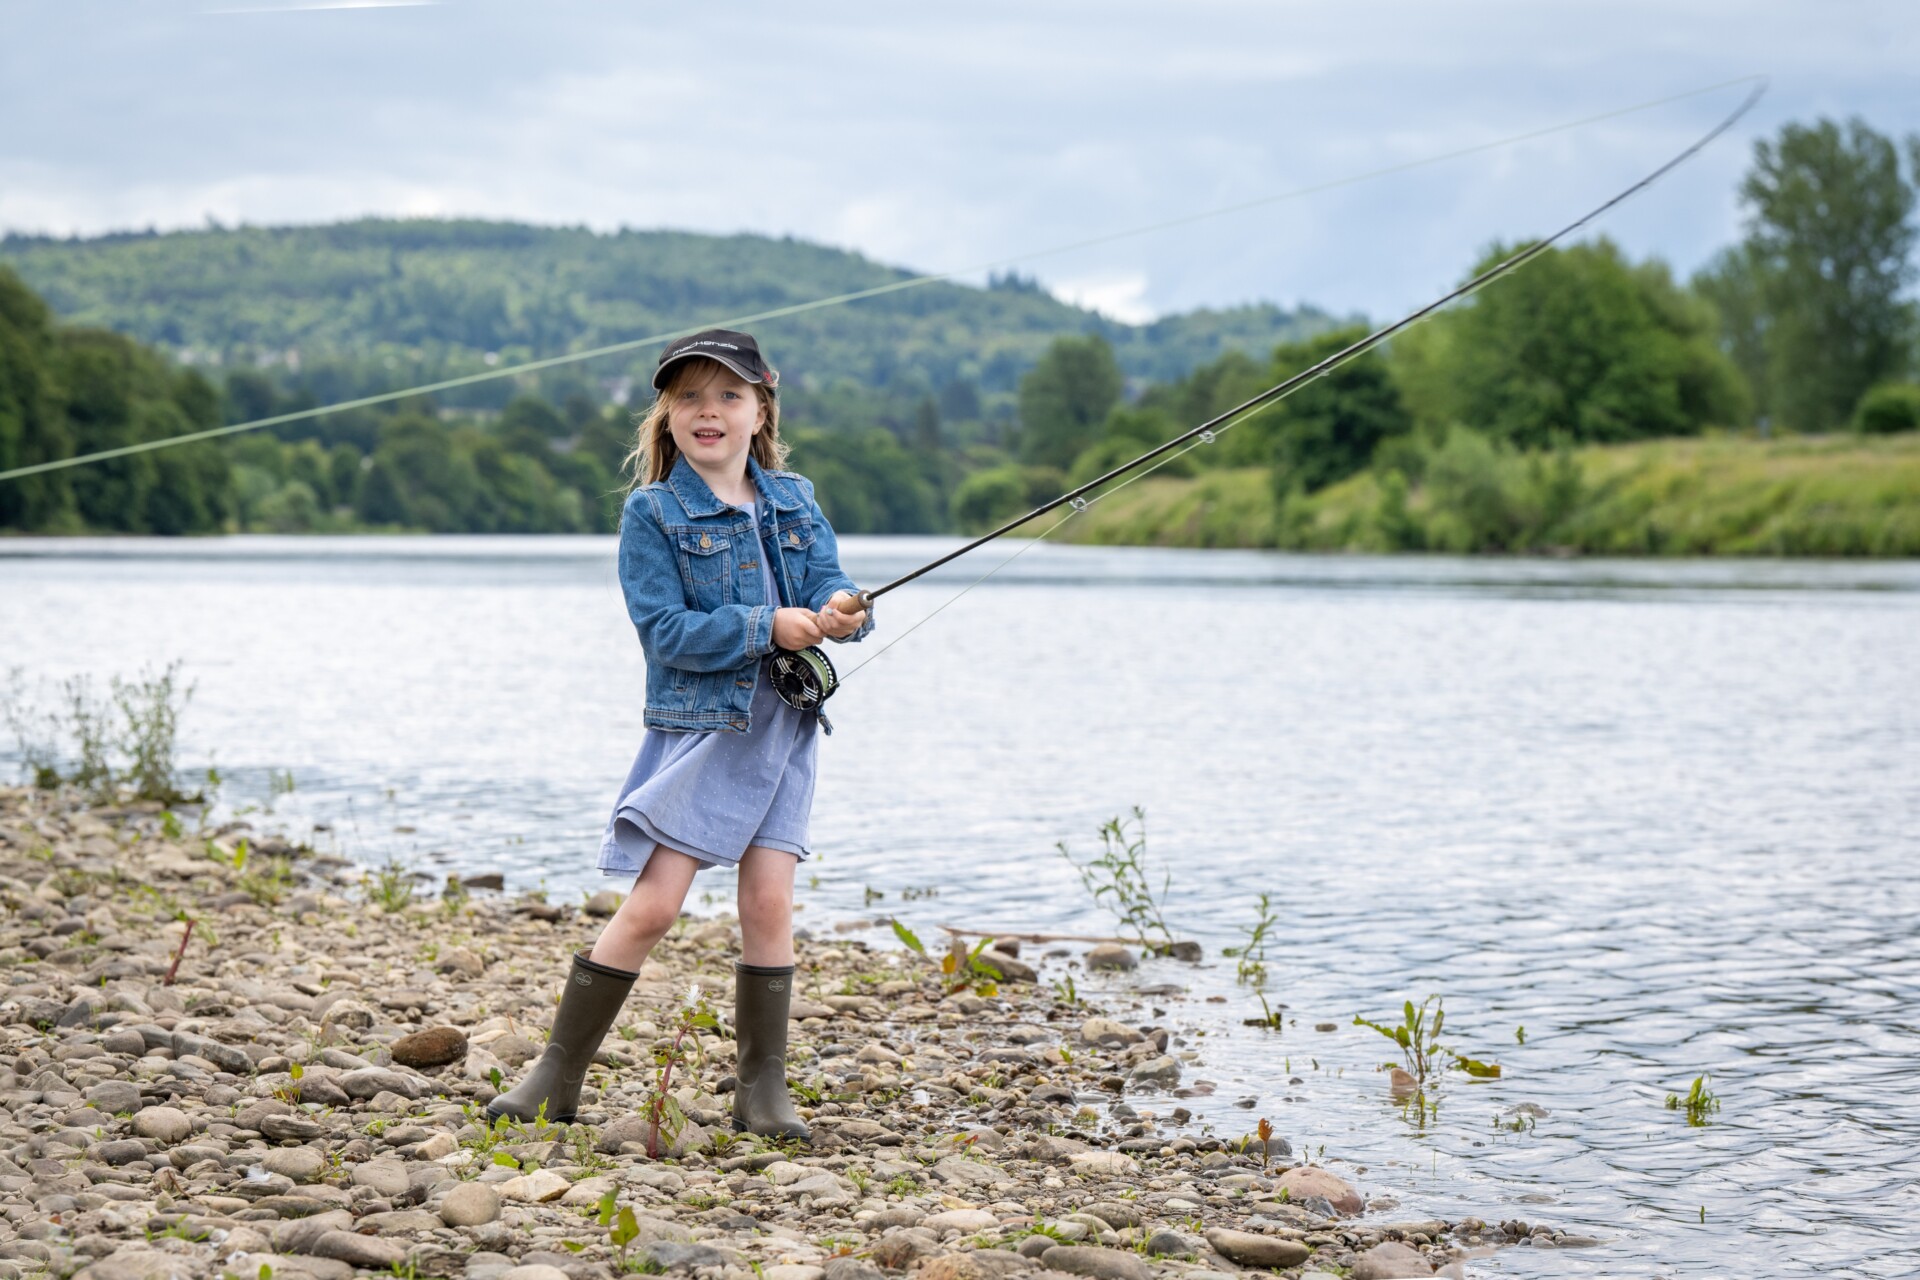 Scottish Game Fair returns for its 35th year